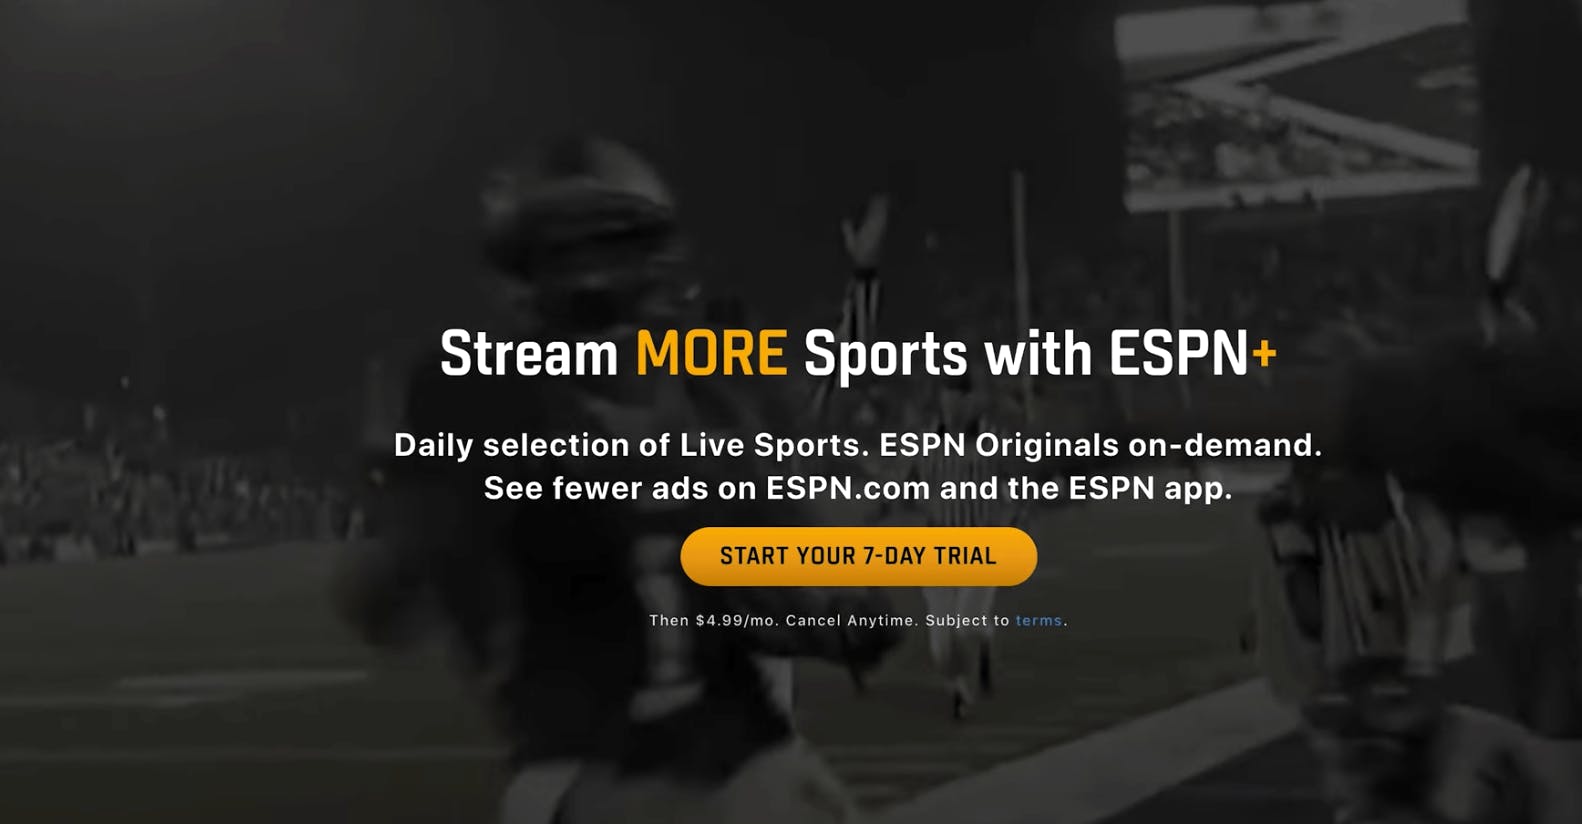 Does Espn Broadcast in 4k? 2